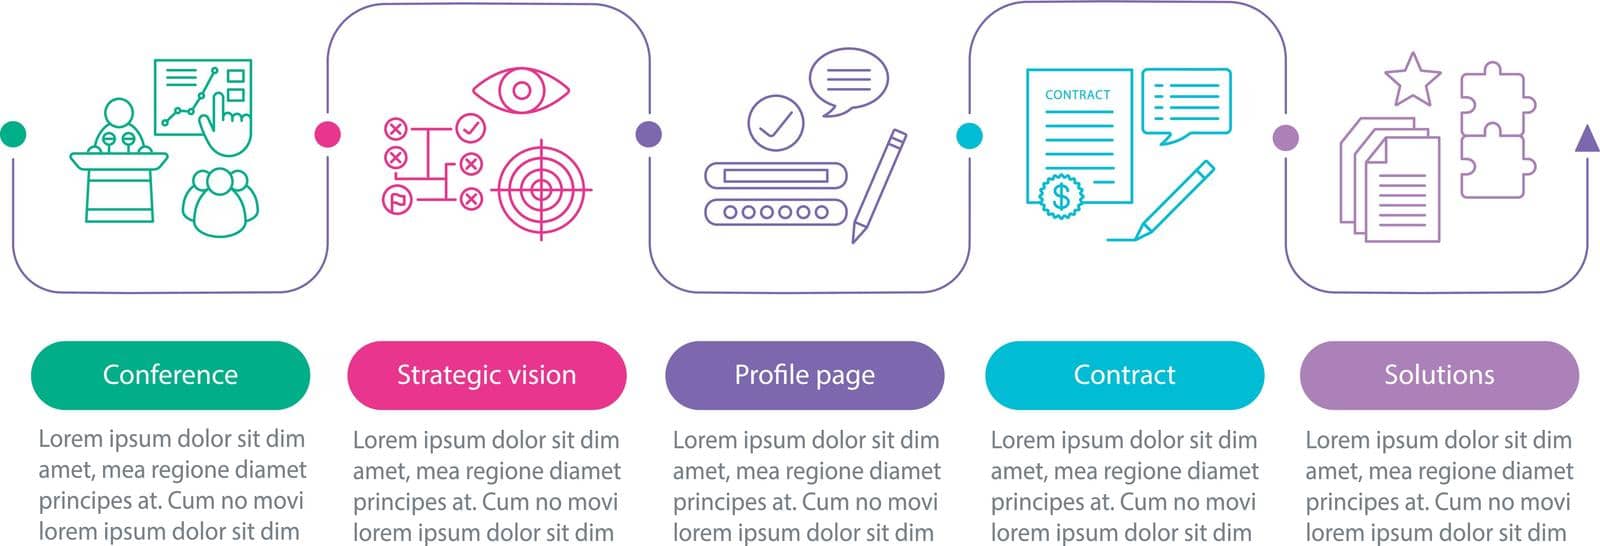 Solution searching vector infographic template. Conference, strategic vision, profile page, contract. Data visualization with five steps and options. Process timeline chart. Workflow layout with icons